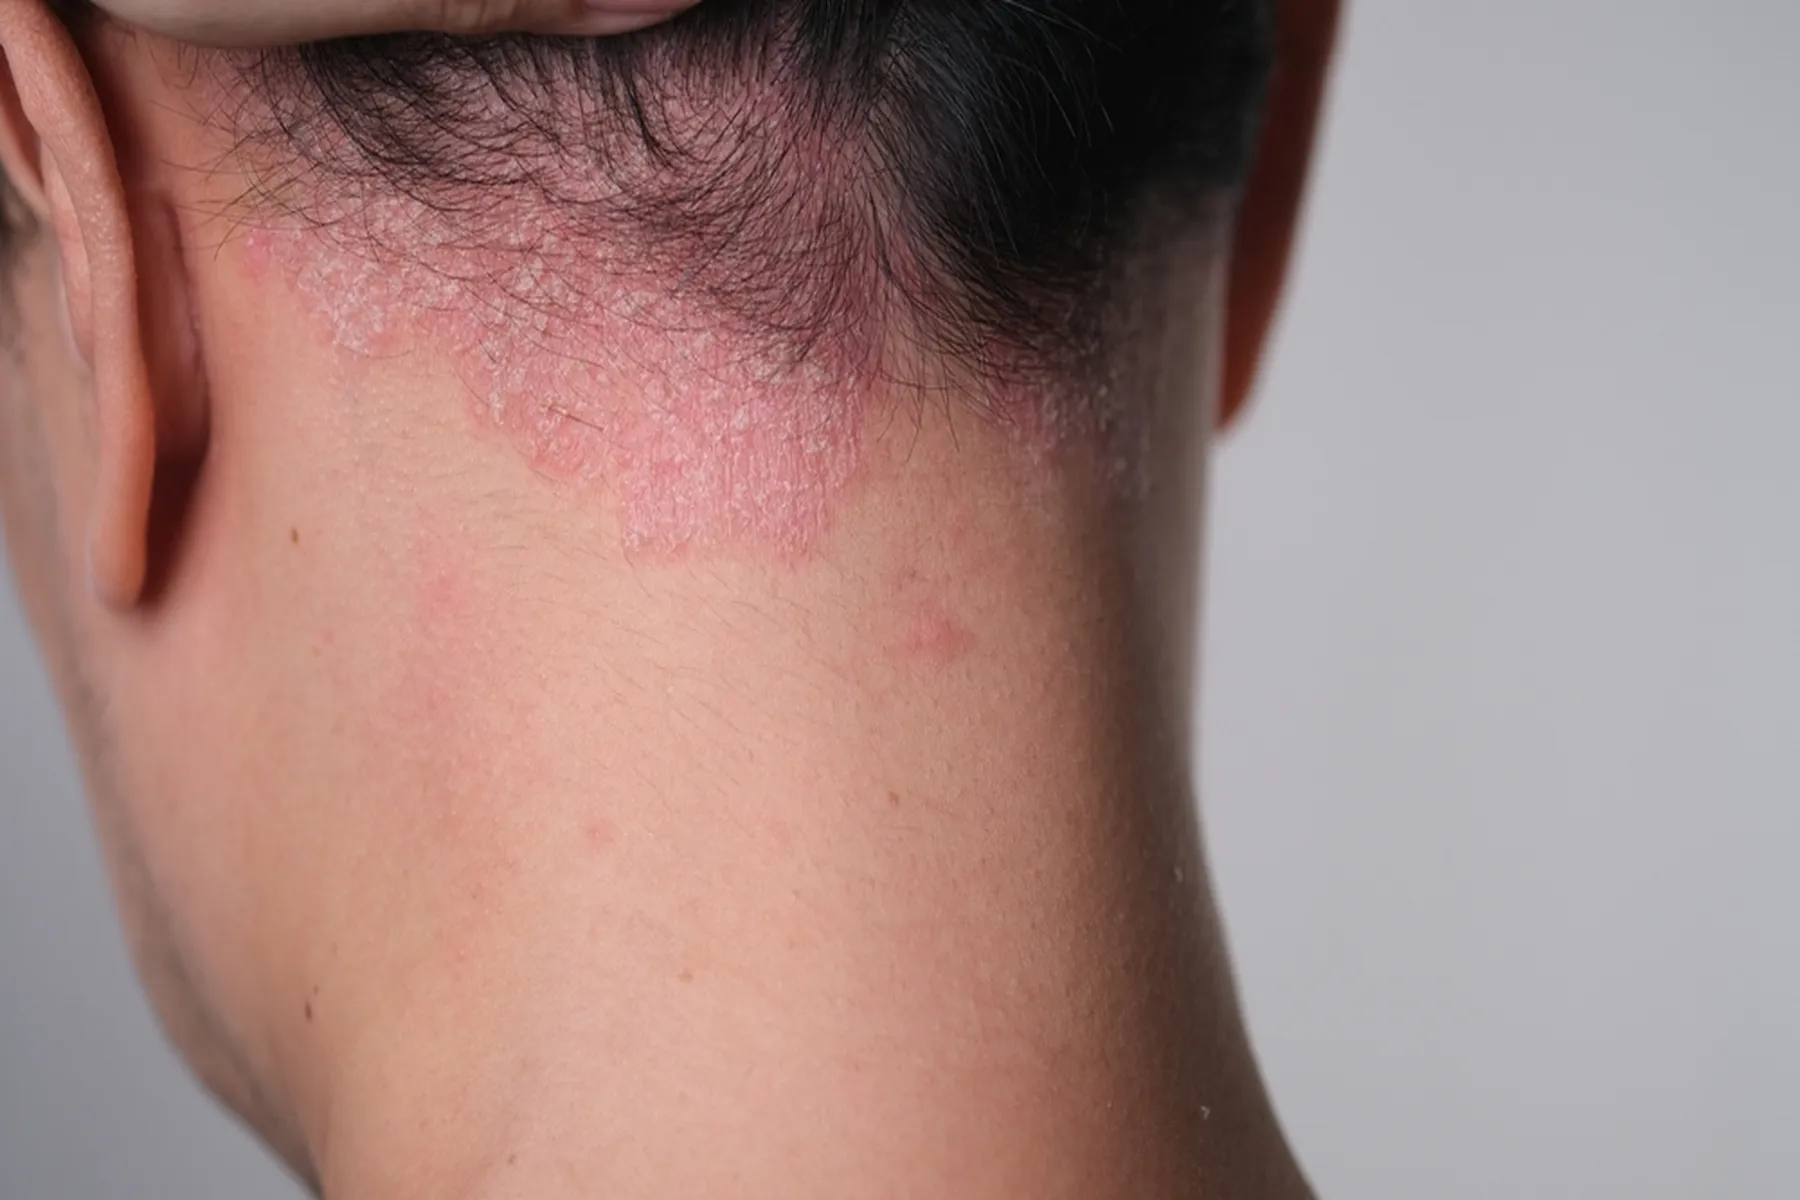 Psoriasis on the back of a person's neck.